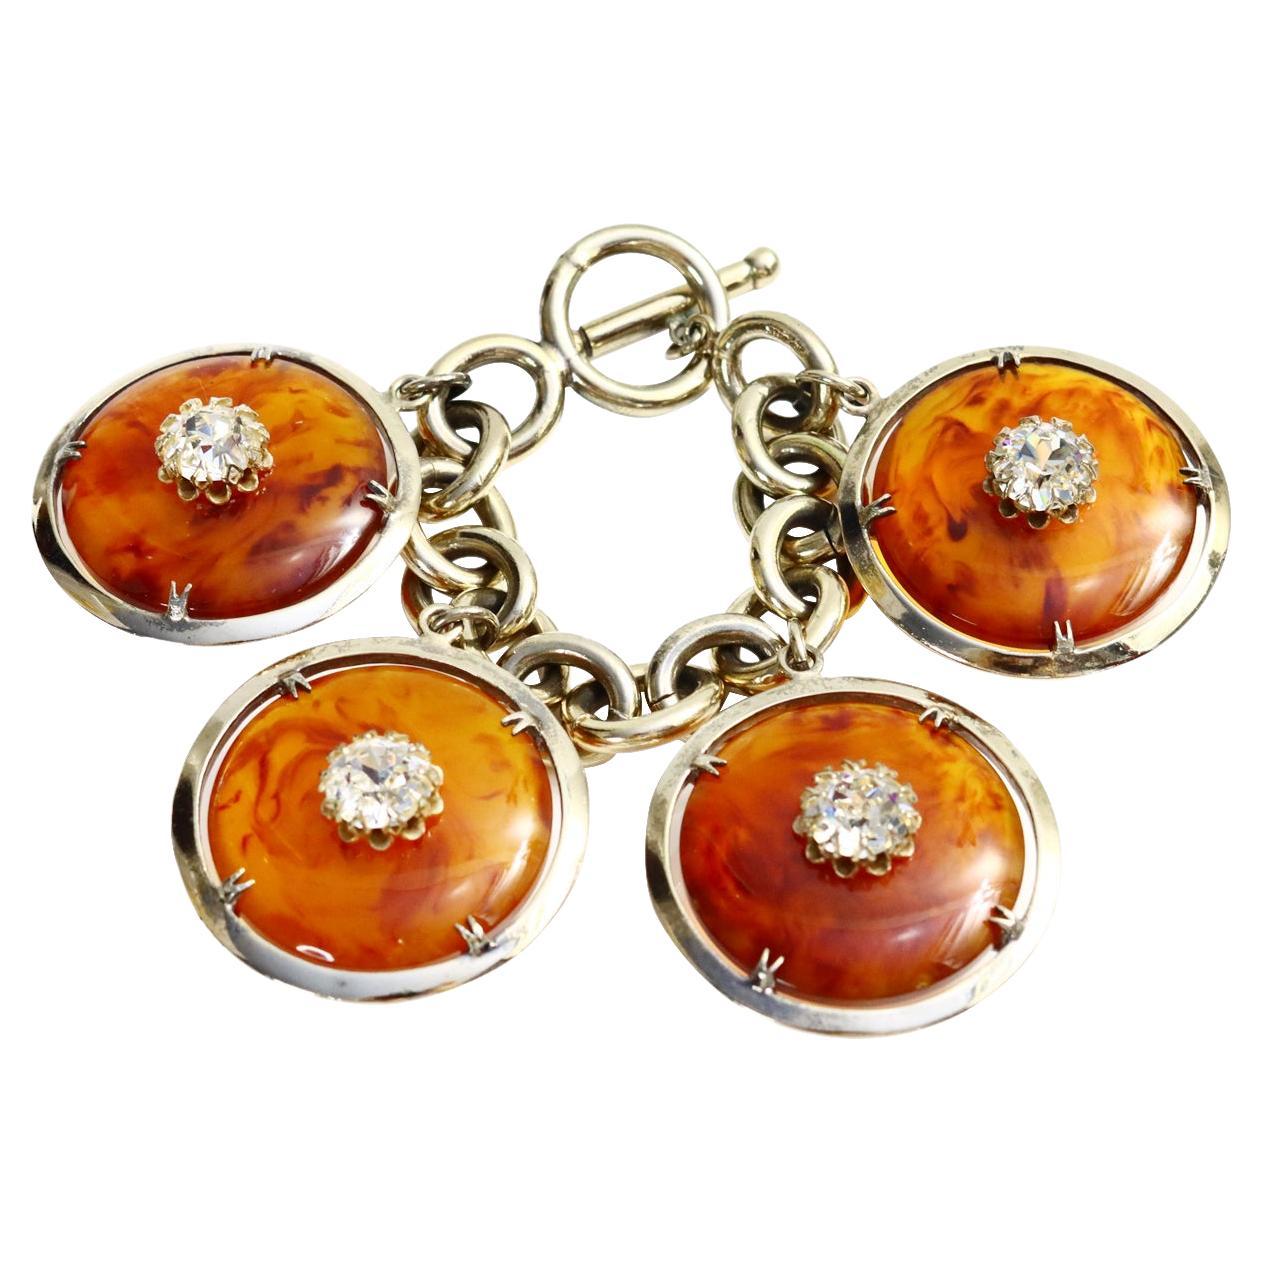 Vintage Nettie Rosenstein Antique Gold/Silver Dangling Faux Tortoise Bracelet Circa 1960s.  The wash is between a Silver and Washed out Gold.  The pieces of Faux Tortoise have a Crystal on each one. The Clasp is a toggle clasp.  It looks so chic on.